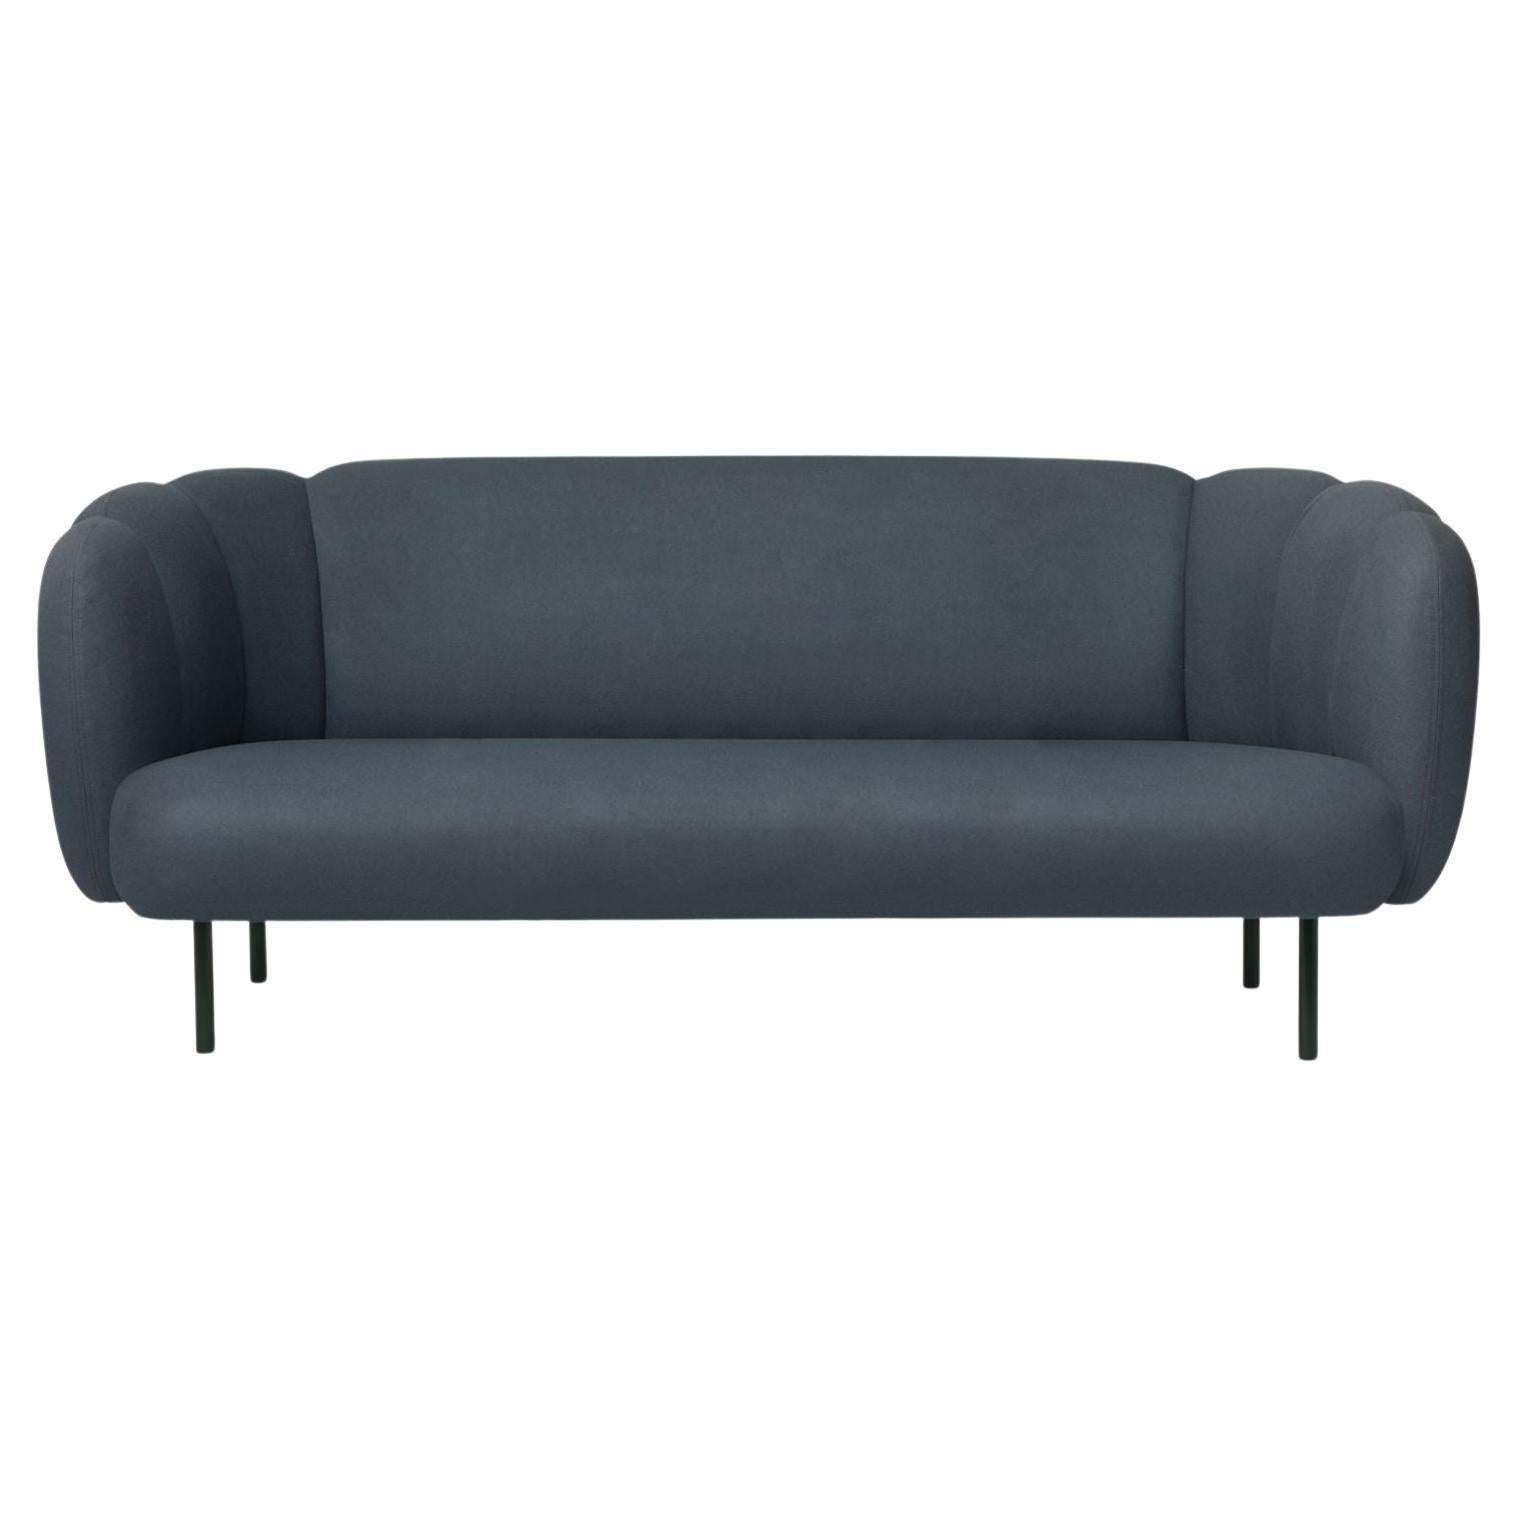 Caper 3 Seater with Stitches Petrol by Warm Nordic For Sale